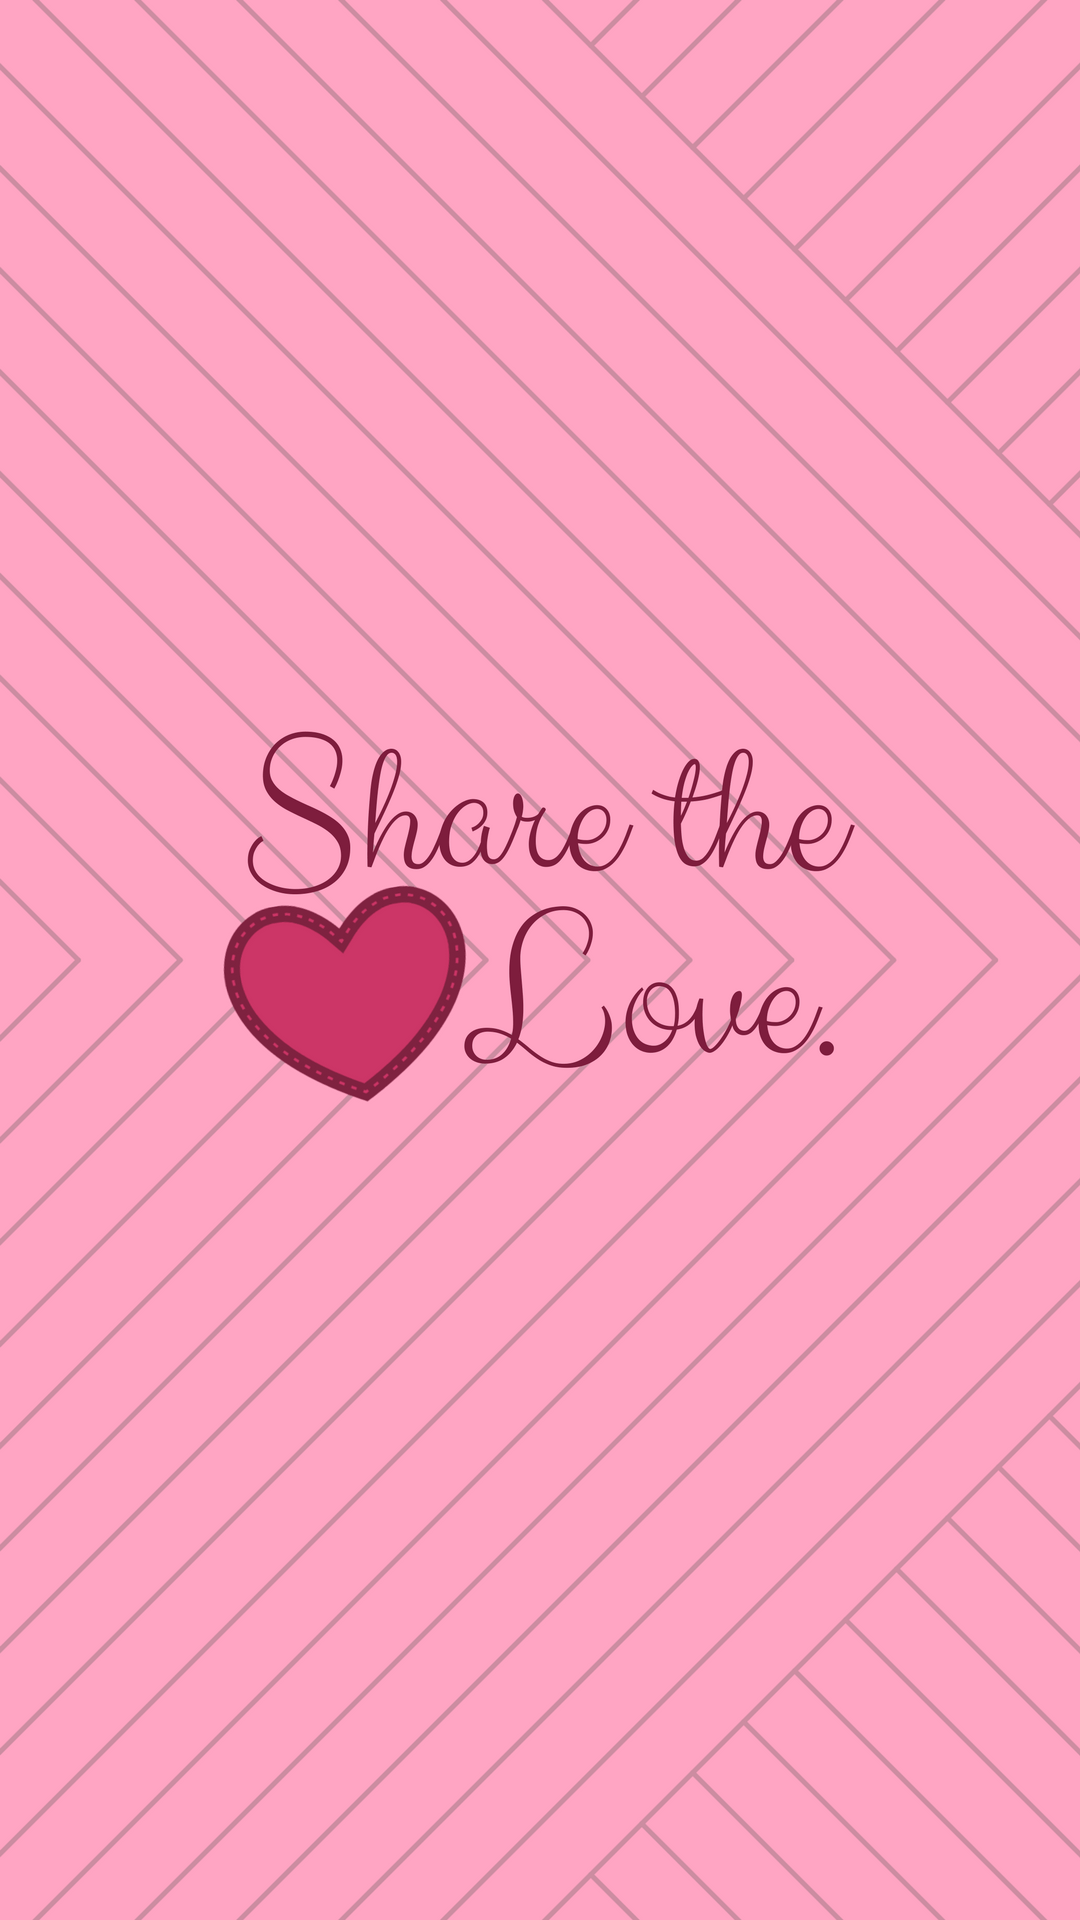 Share the Love. iPhone wallpaper (1080x1920) American